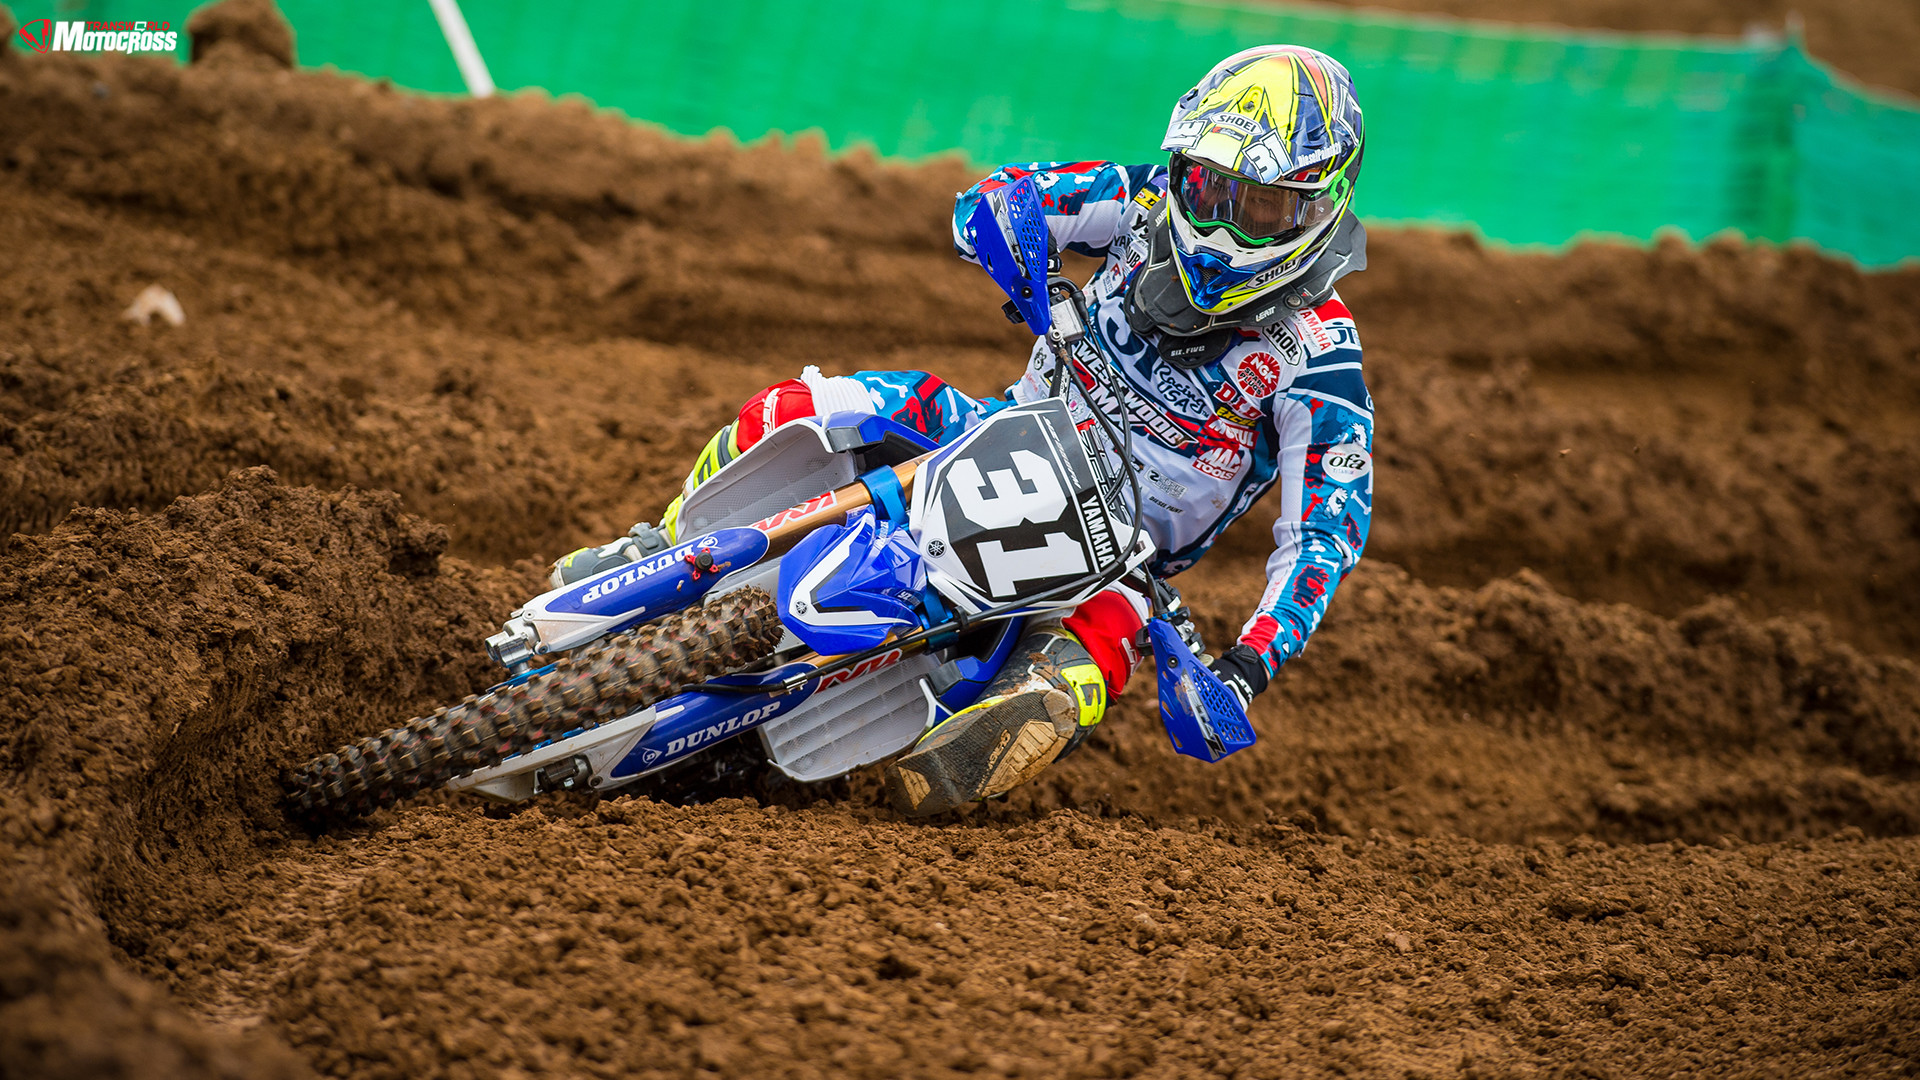 wallpapers motocross,motocross,sports,motorcycle racing,freestyle motocross,motorcycling